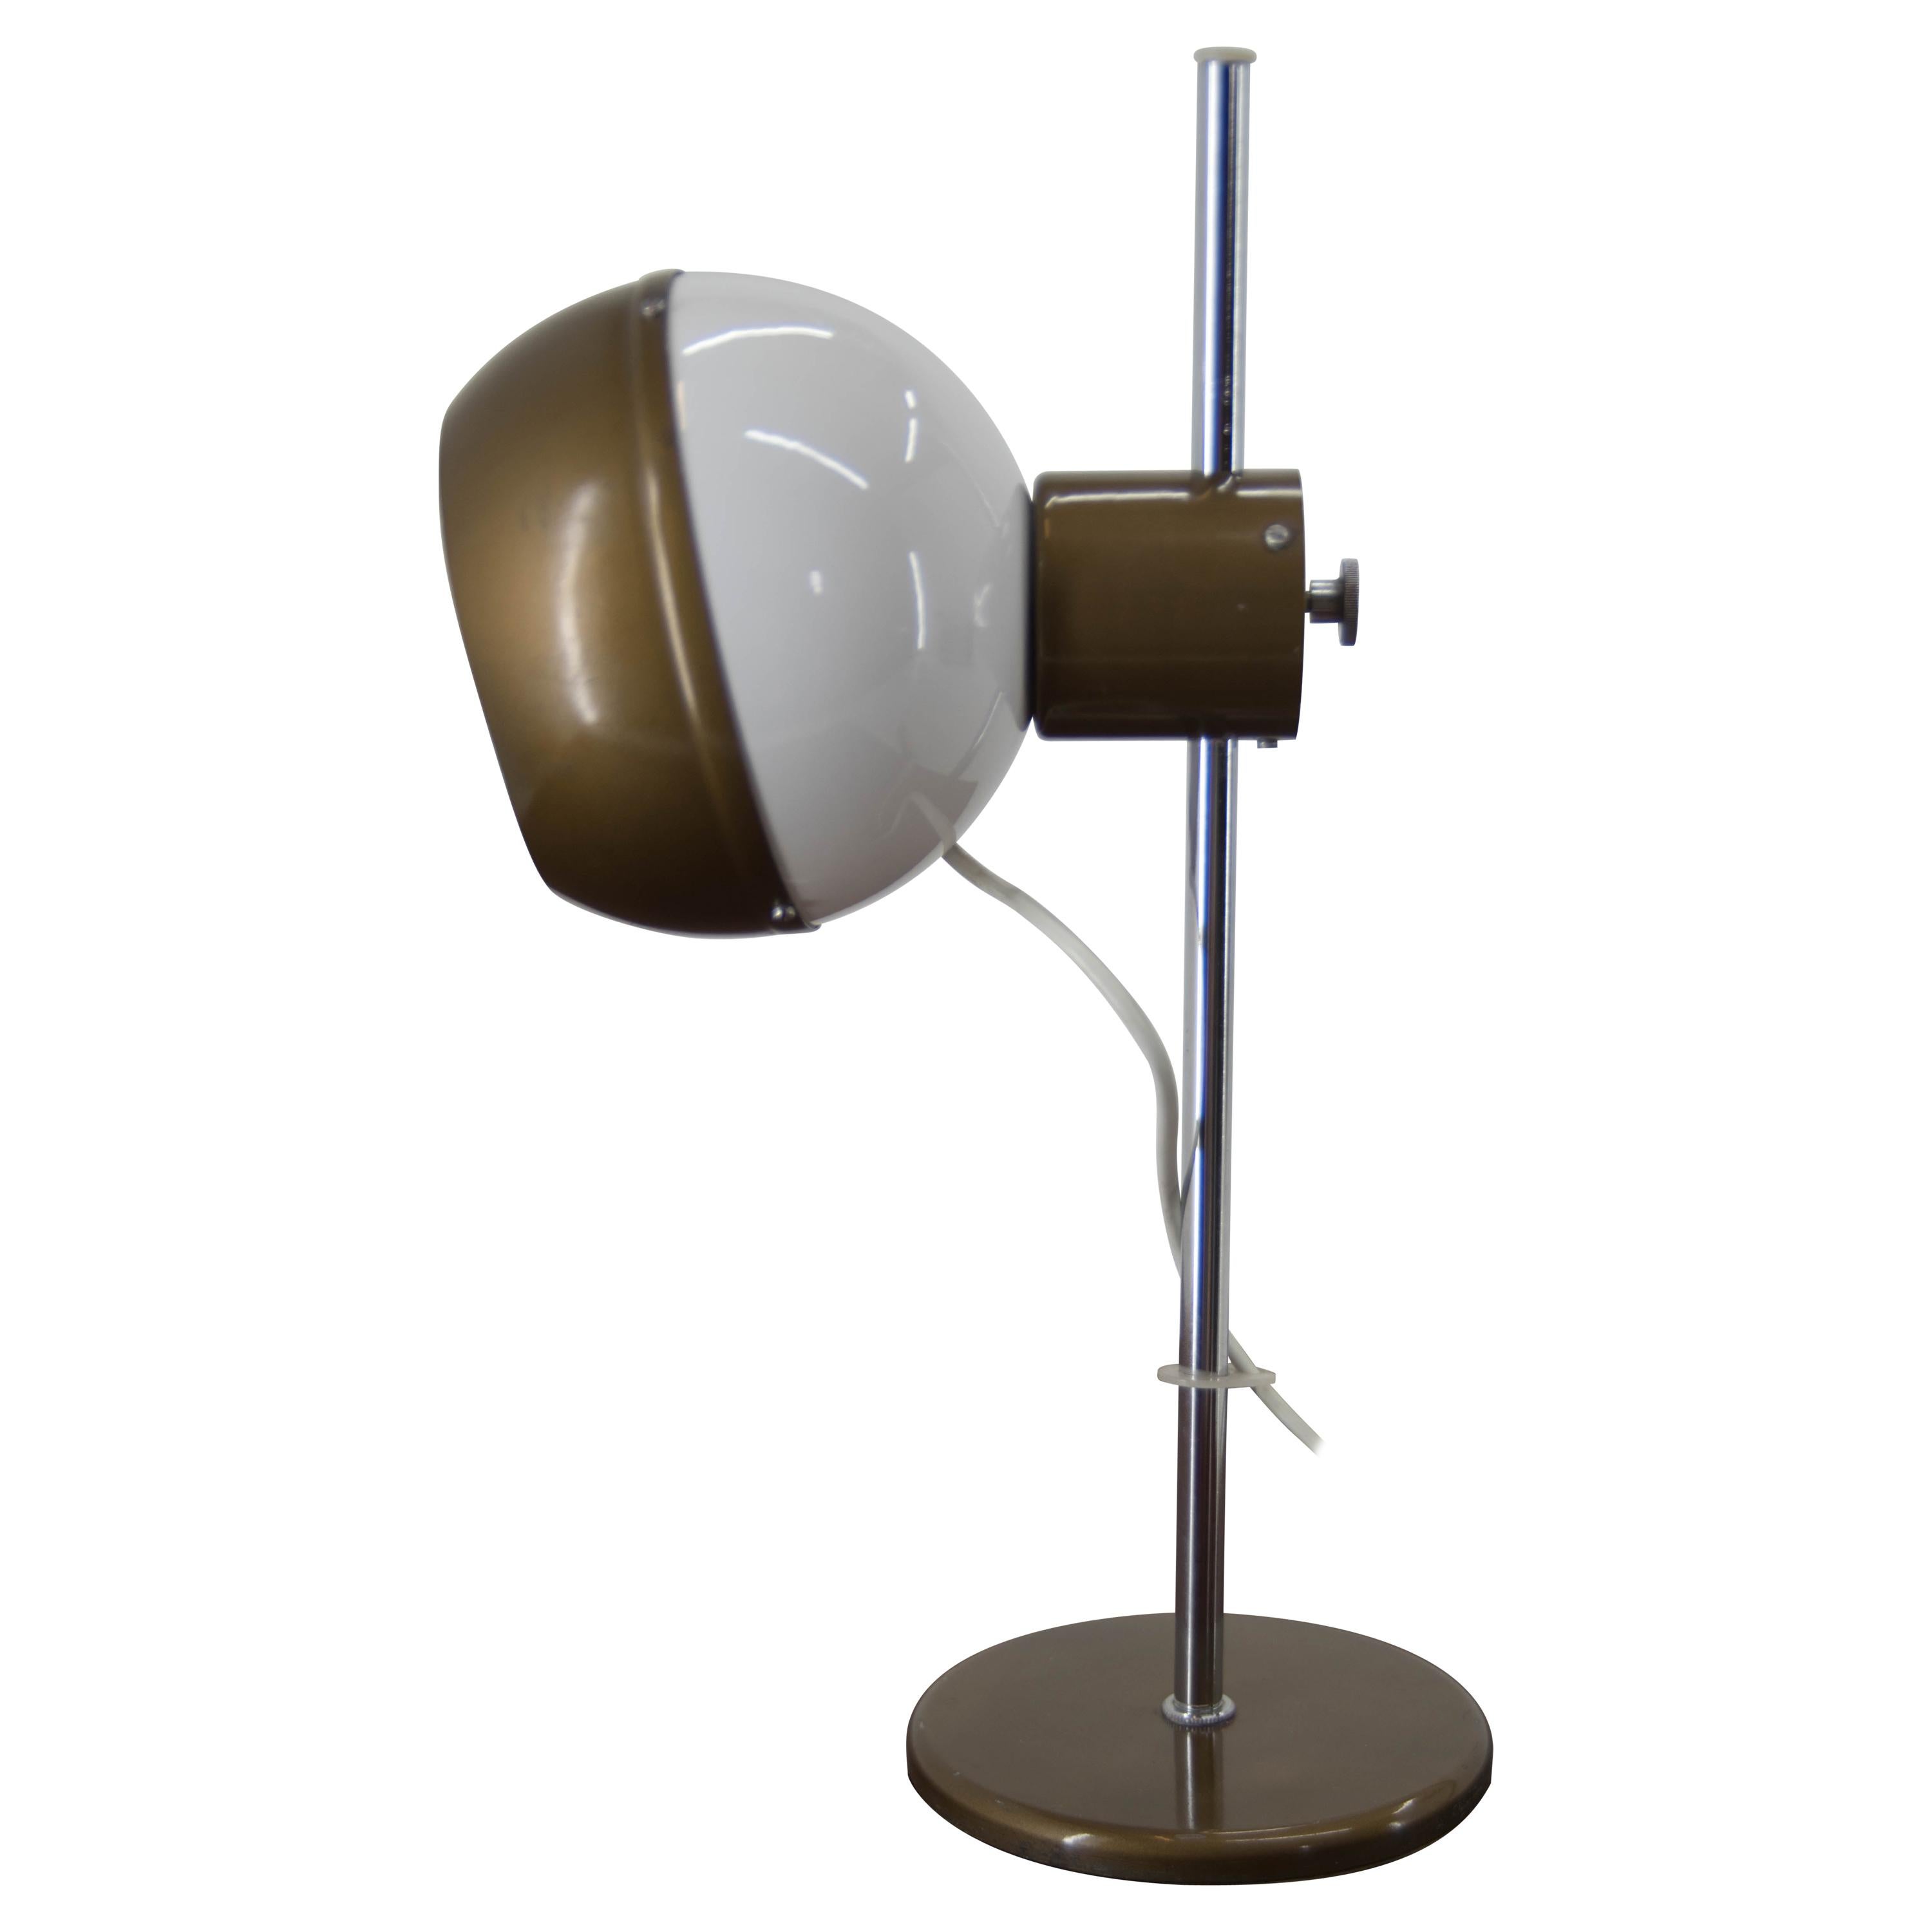 Adjustable Magnetic Table Lamp by Drukov, 1970s, Two Items Available